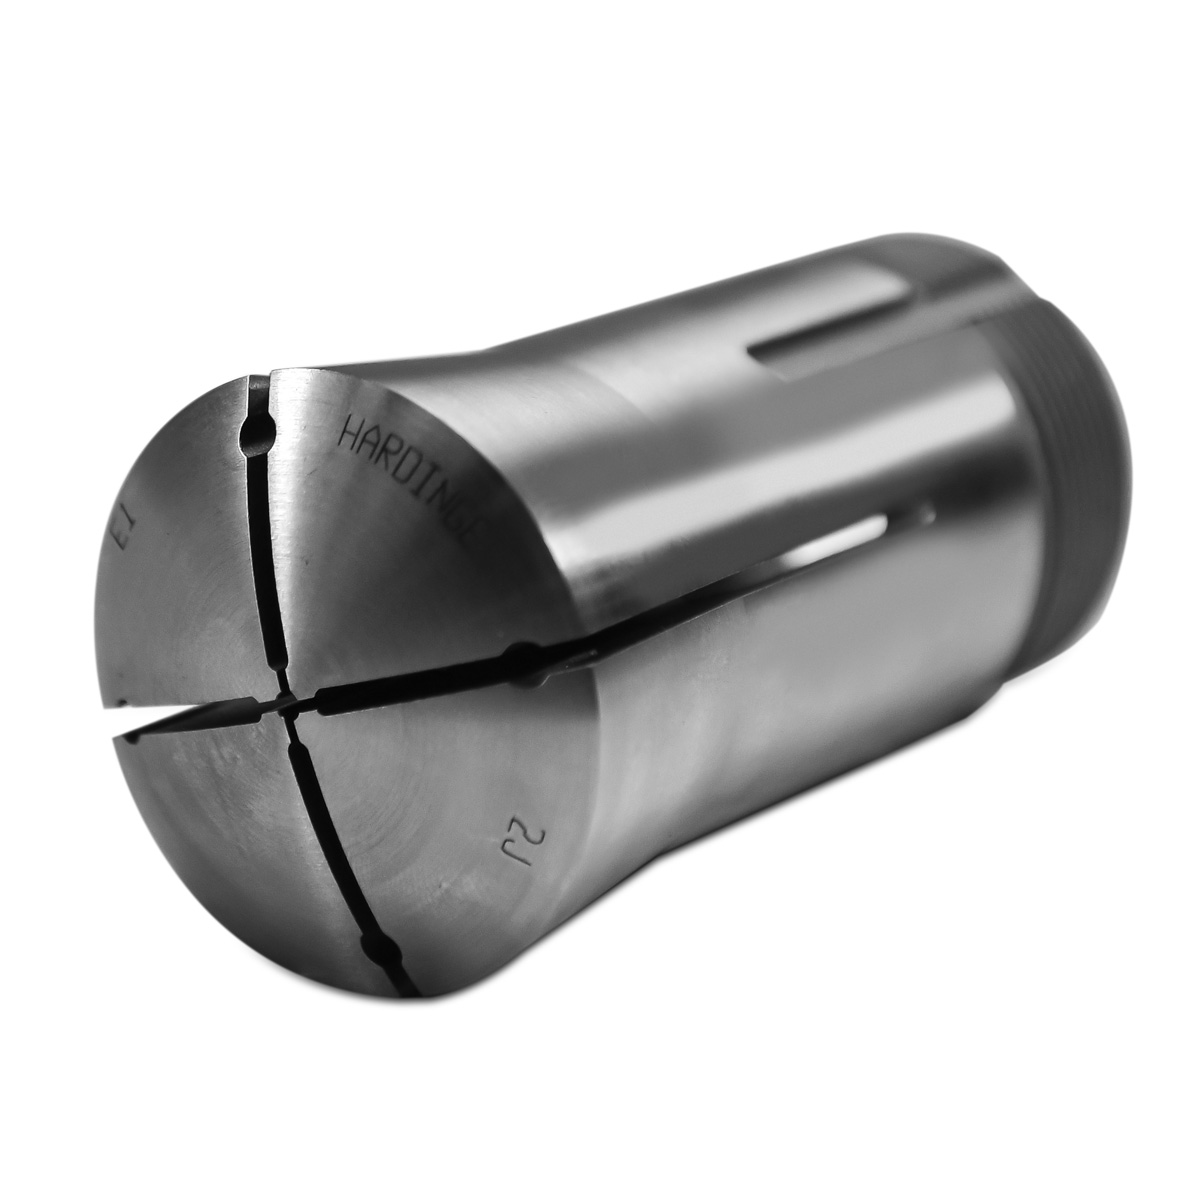 2J Emergency Collet with 1/16" pilot hole